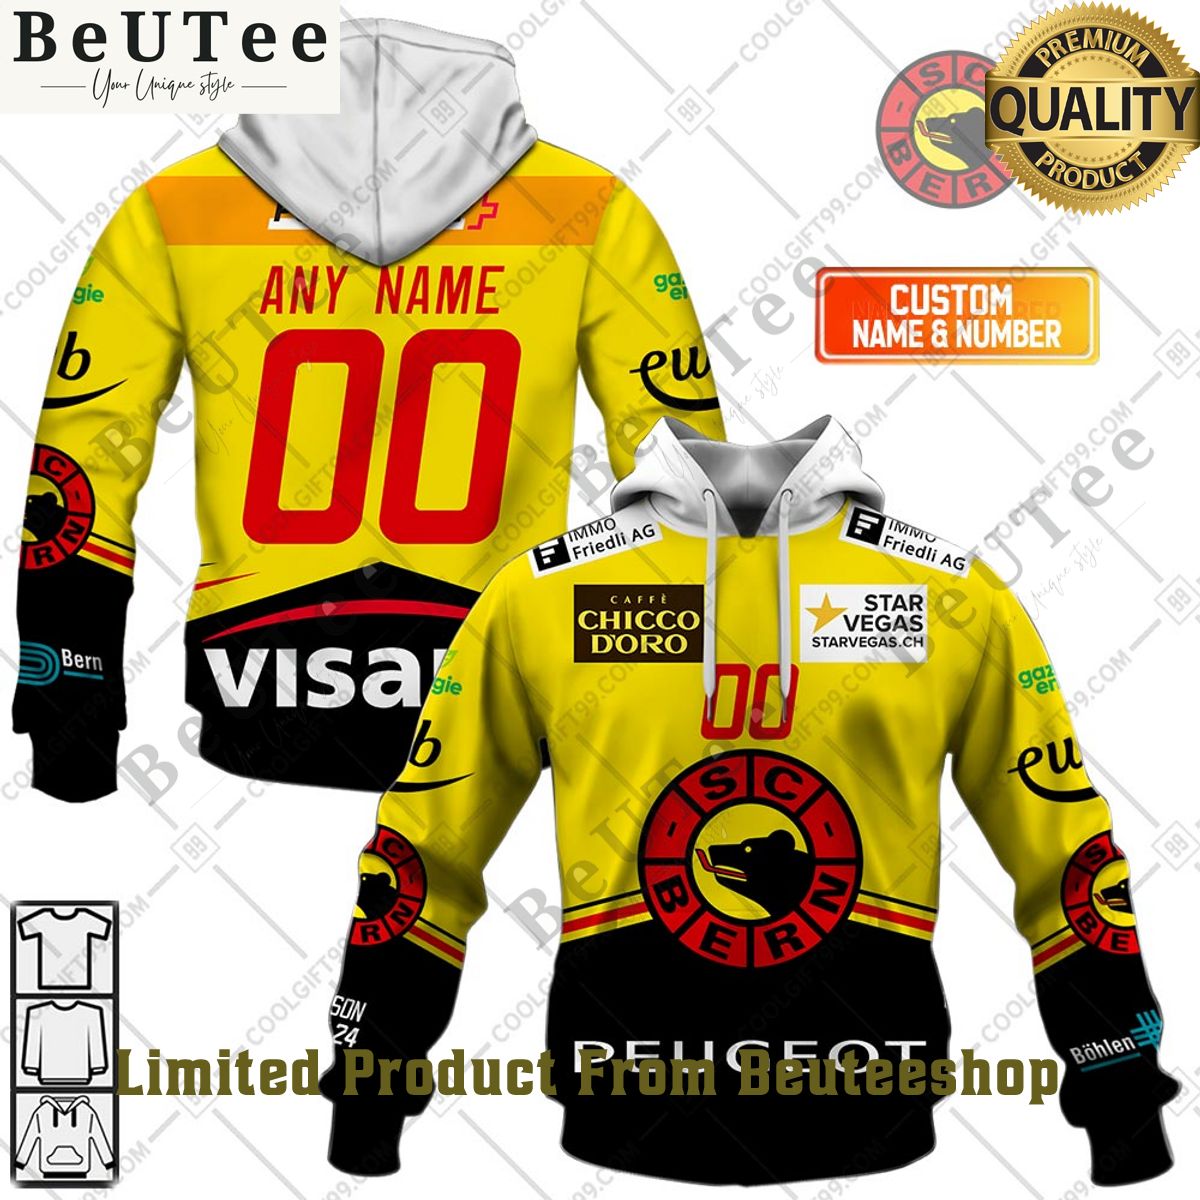 personalized name and number nl hockey sc bern away jersey style printed hoodie shirt 1 Jq35y.jpg